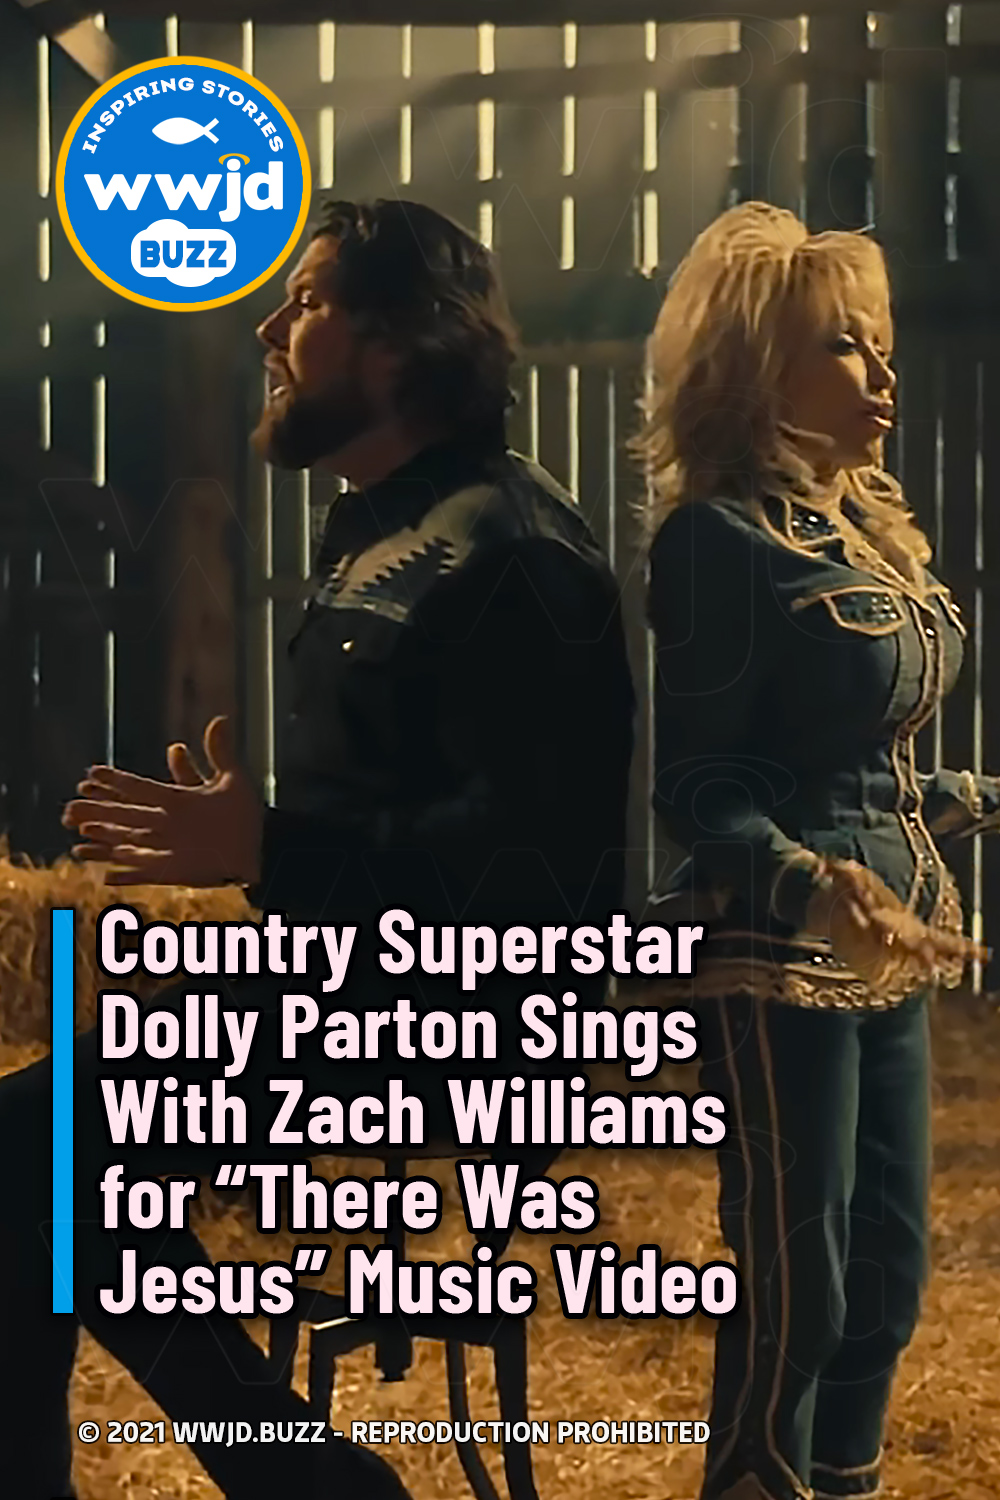 Country Superstar Dolly Parton Sings With Zach Williams for “There Was Jesus” Music Video